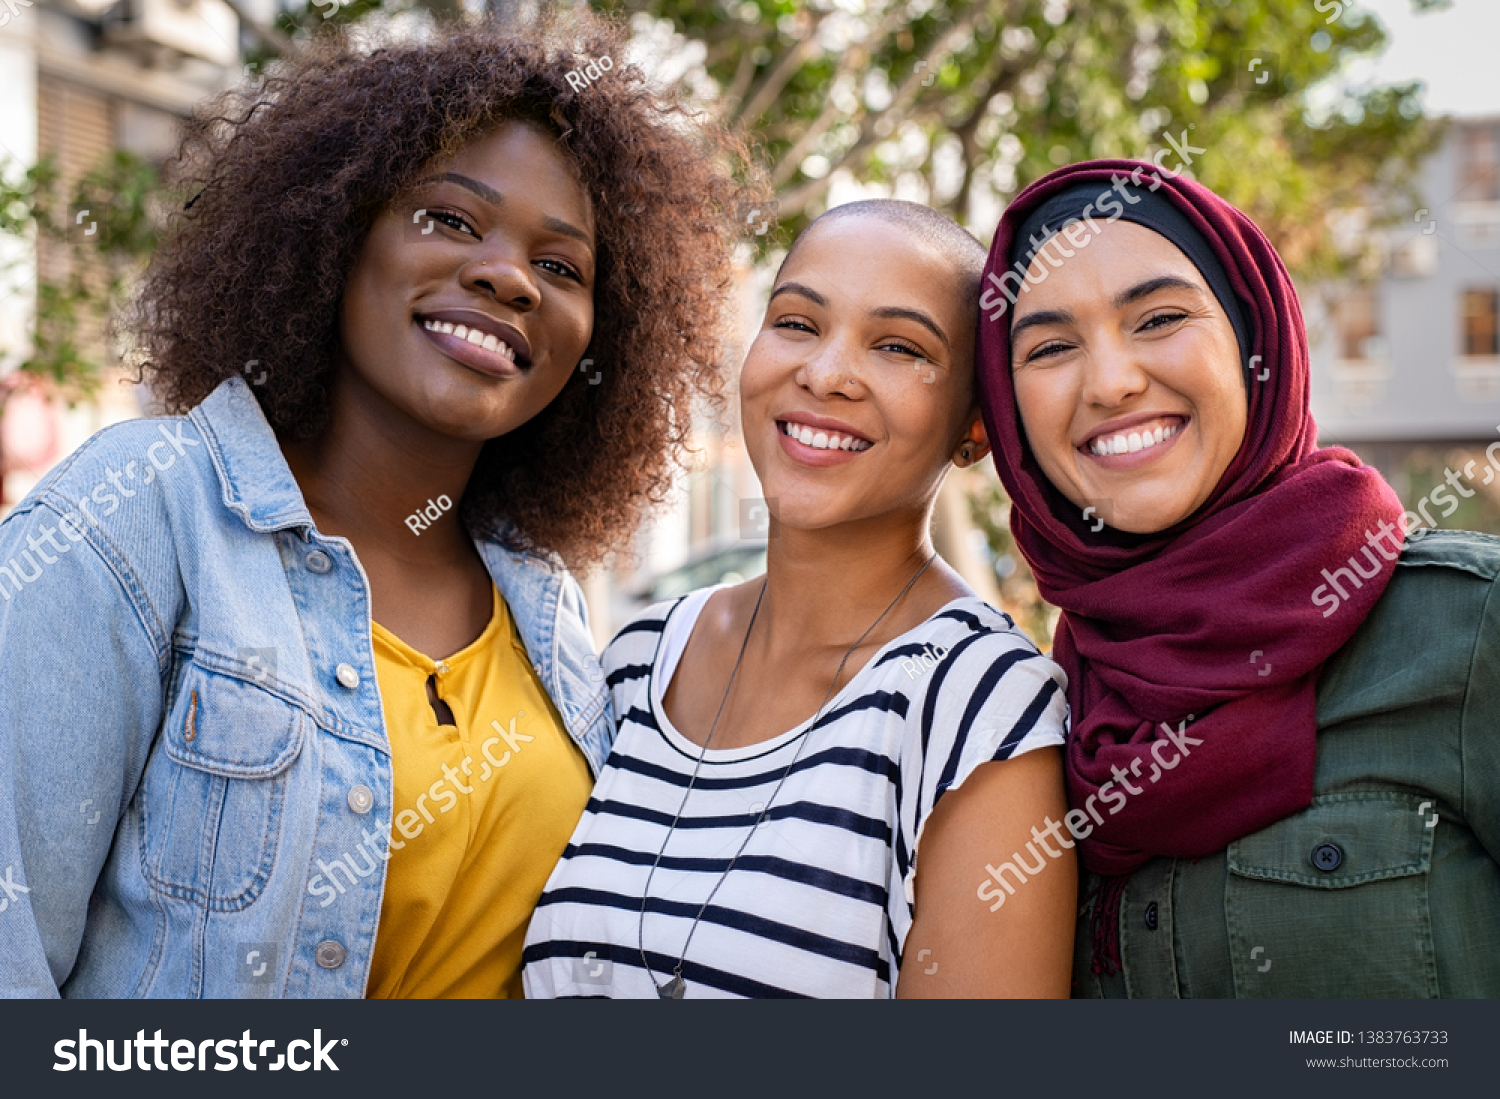 Group of three happy multiethnic friends looking at camera. Portrait of young women of different cultures enjoying vacation together. Smiling islamic girl with two african american friends outdoor. #1383763733